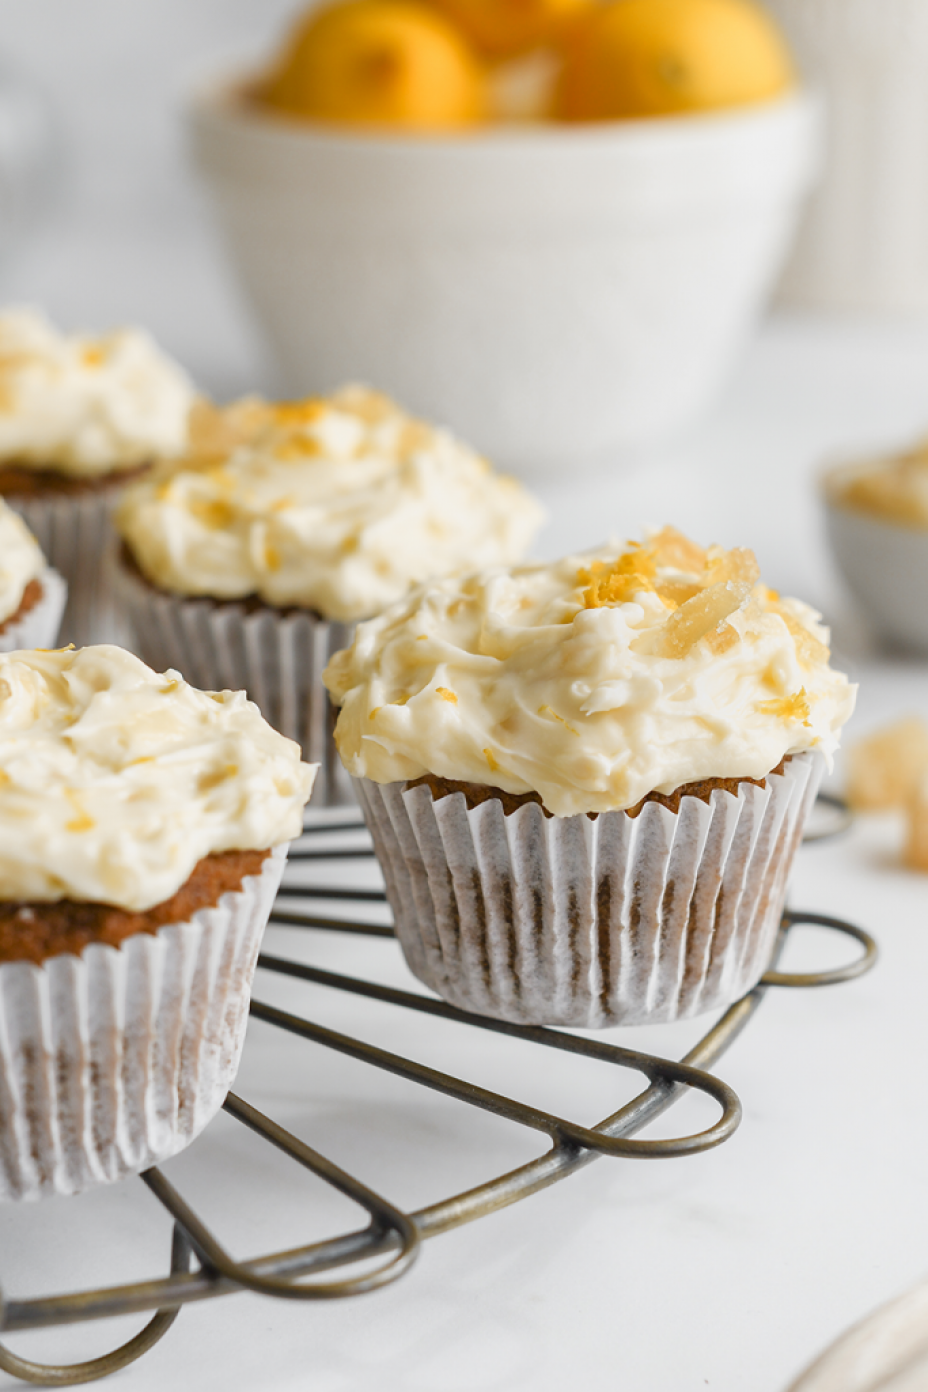 Lemon and ginger carrot cupcakes